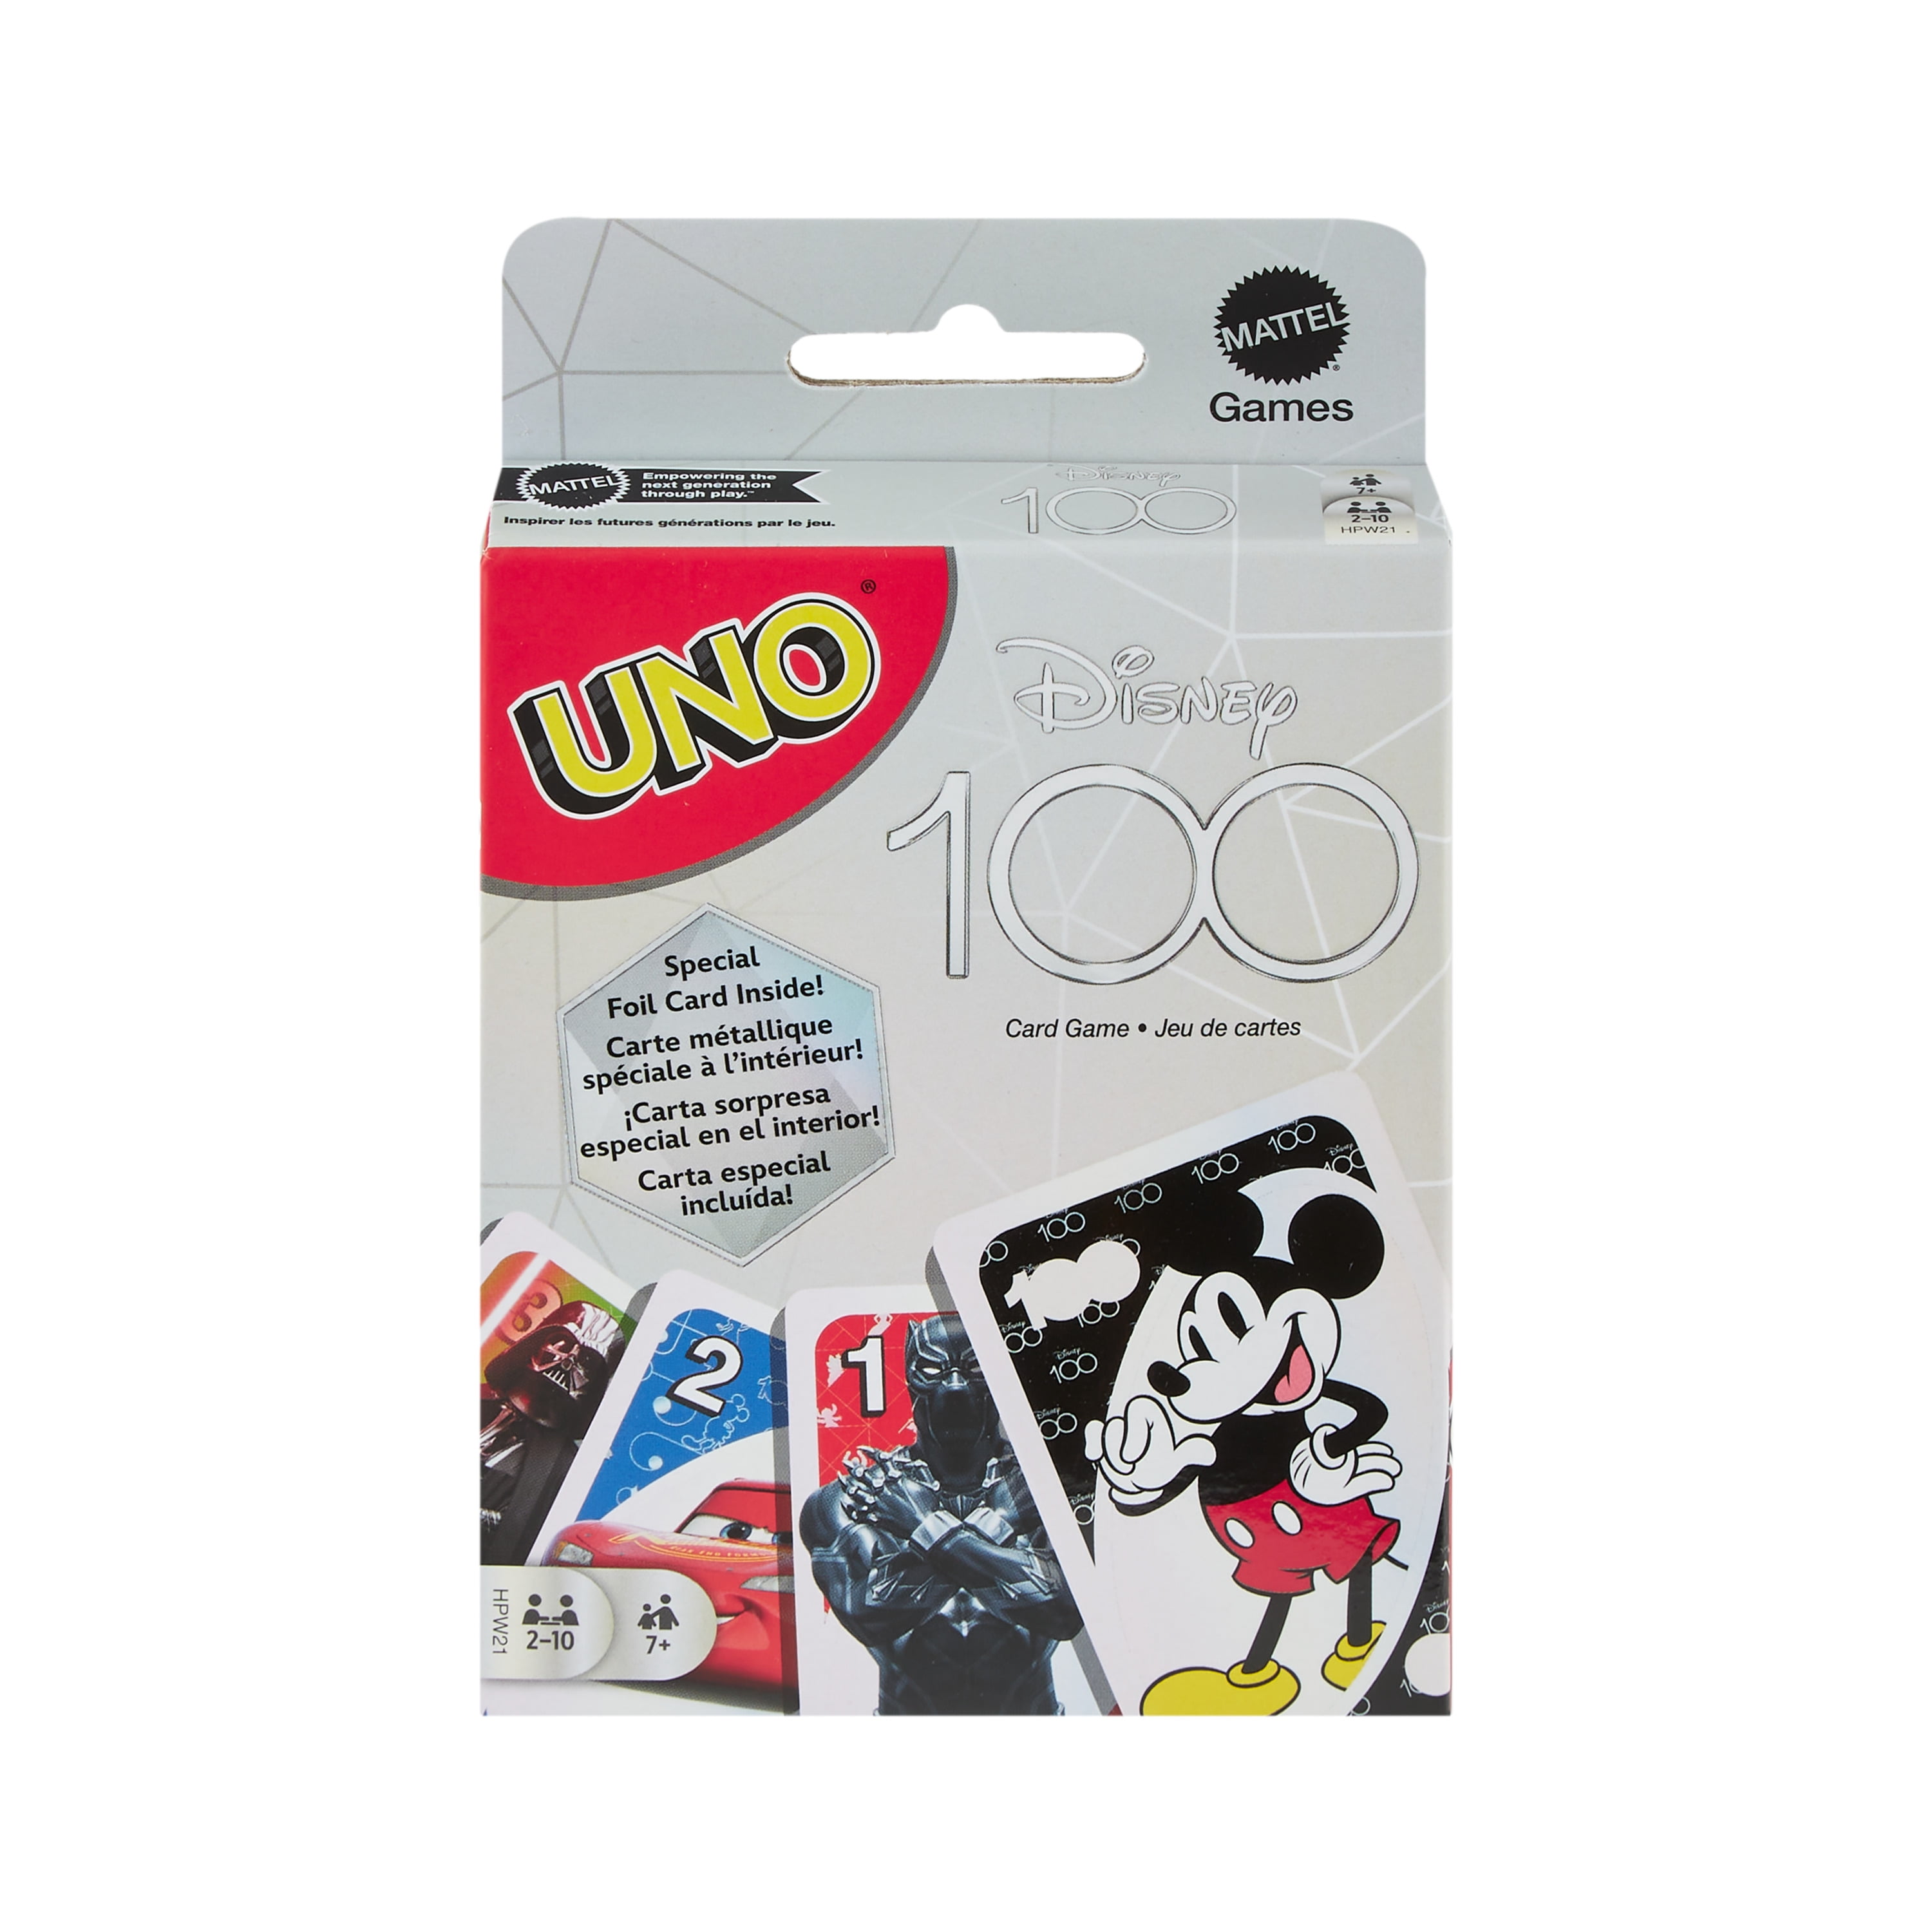 UNO Disney 100 Card Game for Kids, Featuring Disney Characters, Collectible  Foil Card